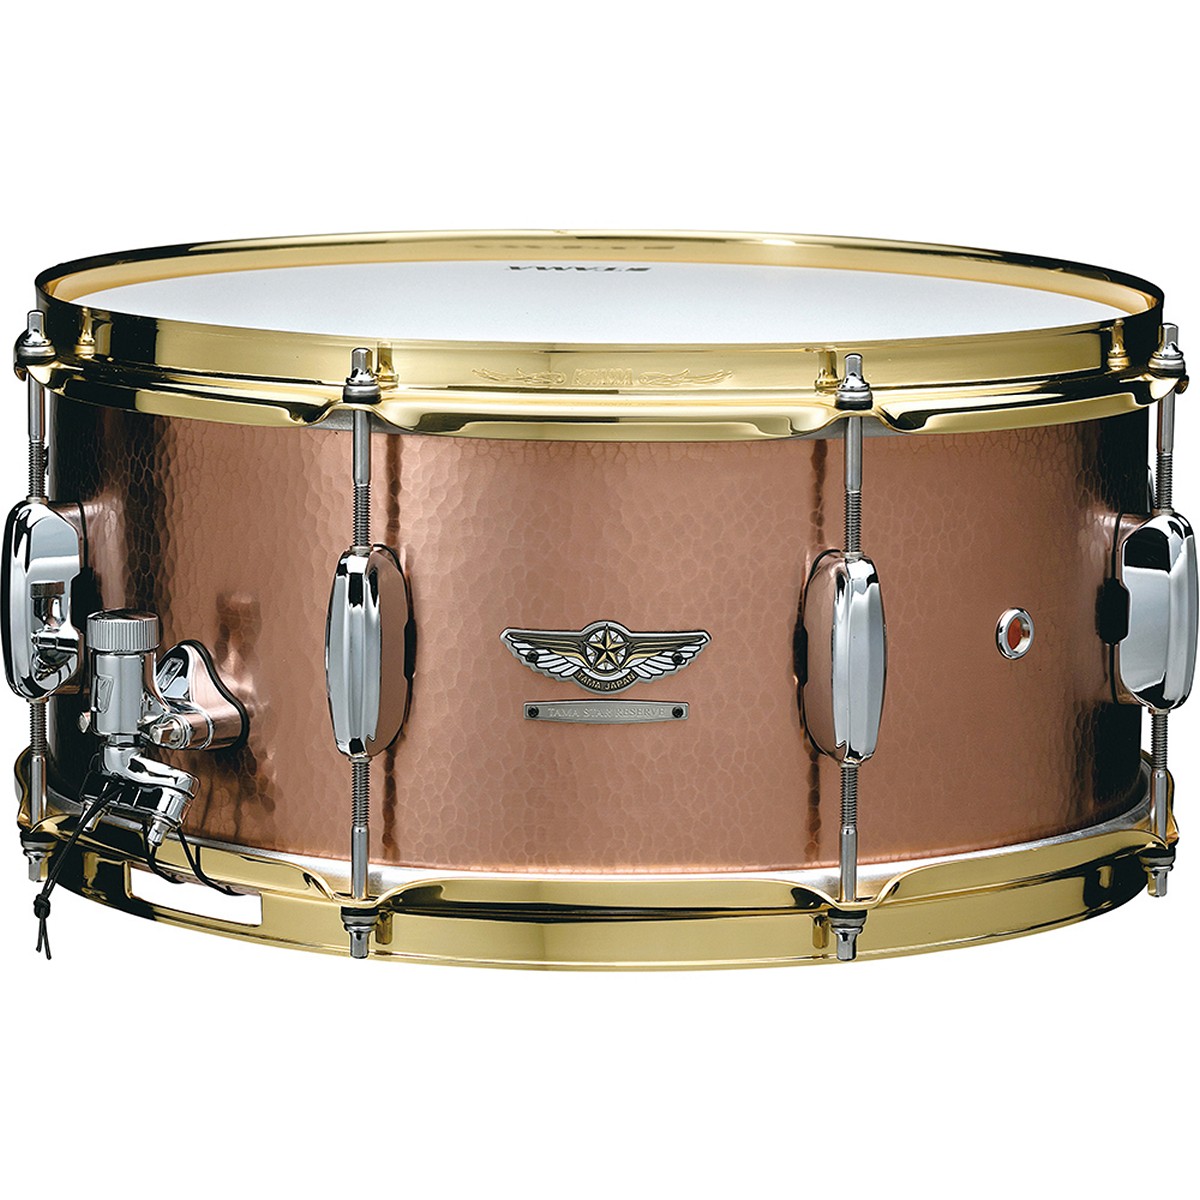 TAMA TCS1465H STAR RESERVE #4 HAND HAMMERED COPPER - 14